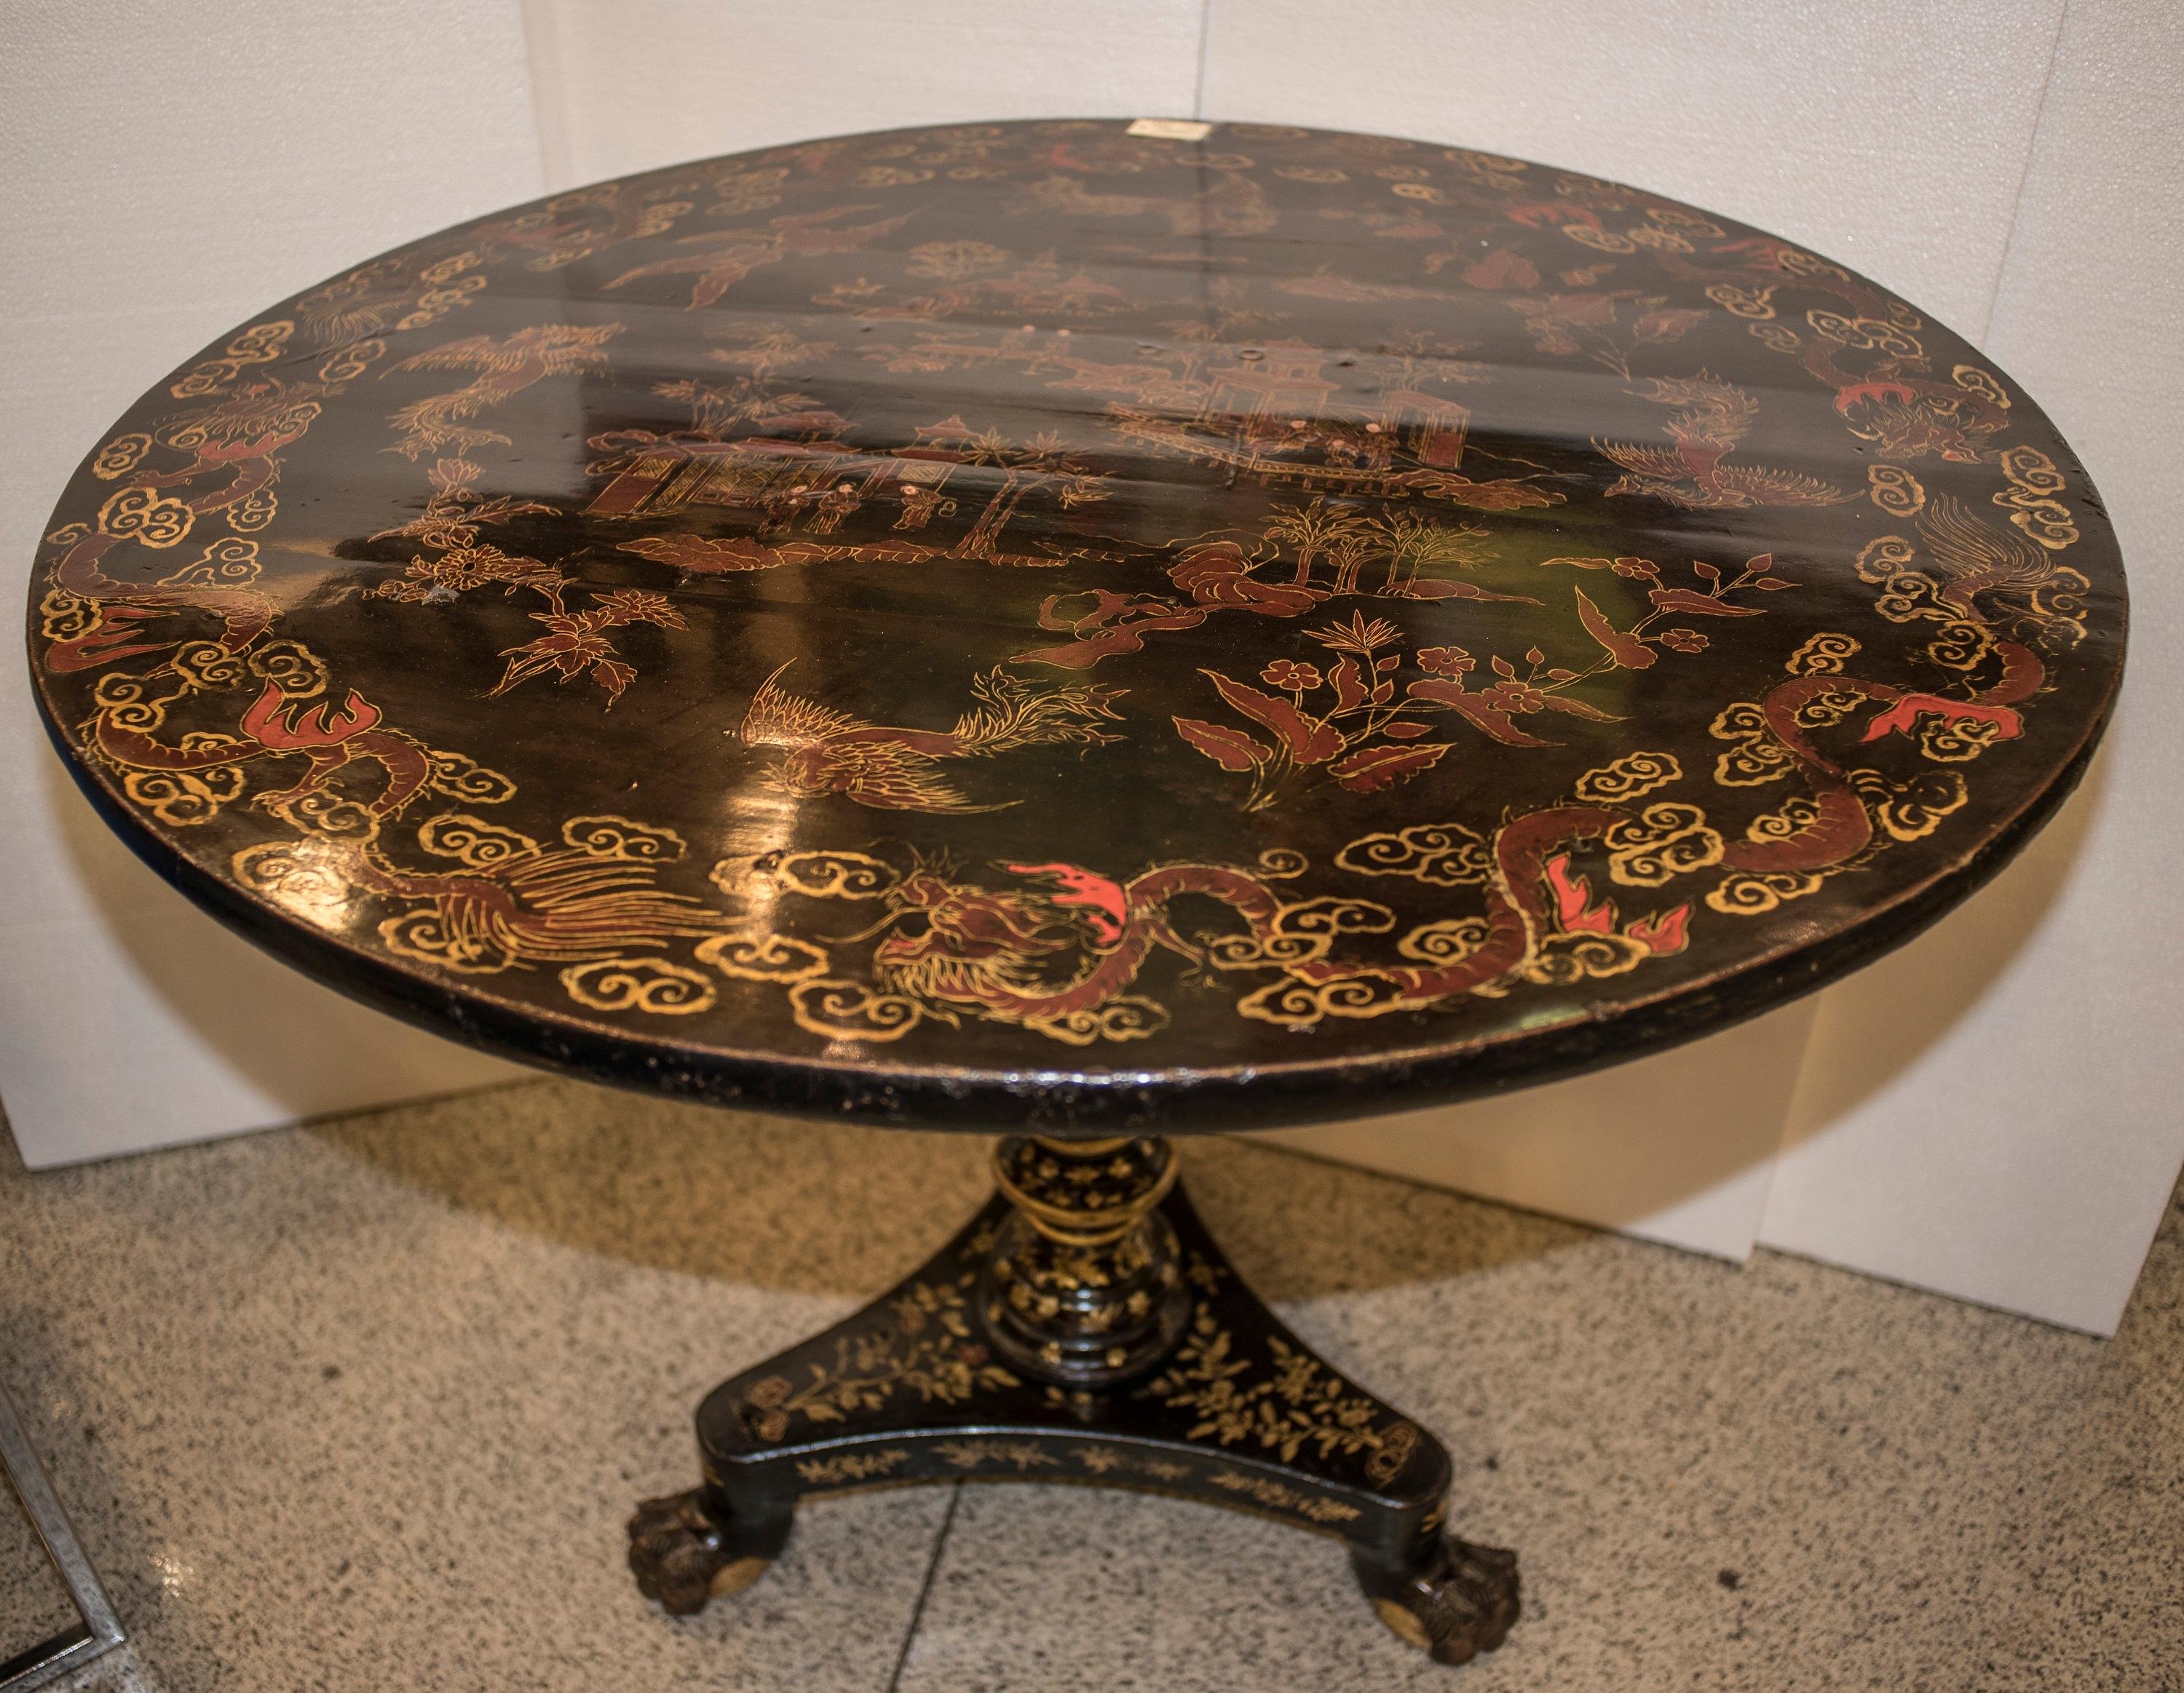 Stunning 19th century tilt-top lacquered and gilded English table with chinoiseries. Feet in claw and ball. In a very good condition. A exquisite piece for anywhere.
The price include a special wooden box or crate for shipping